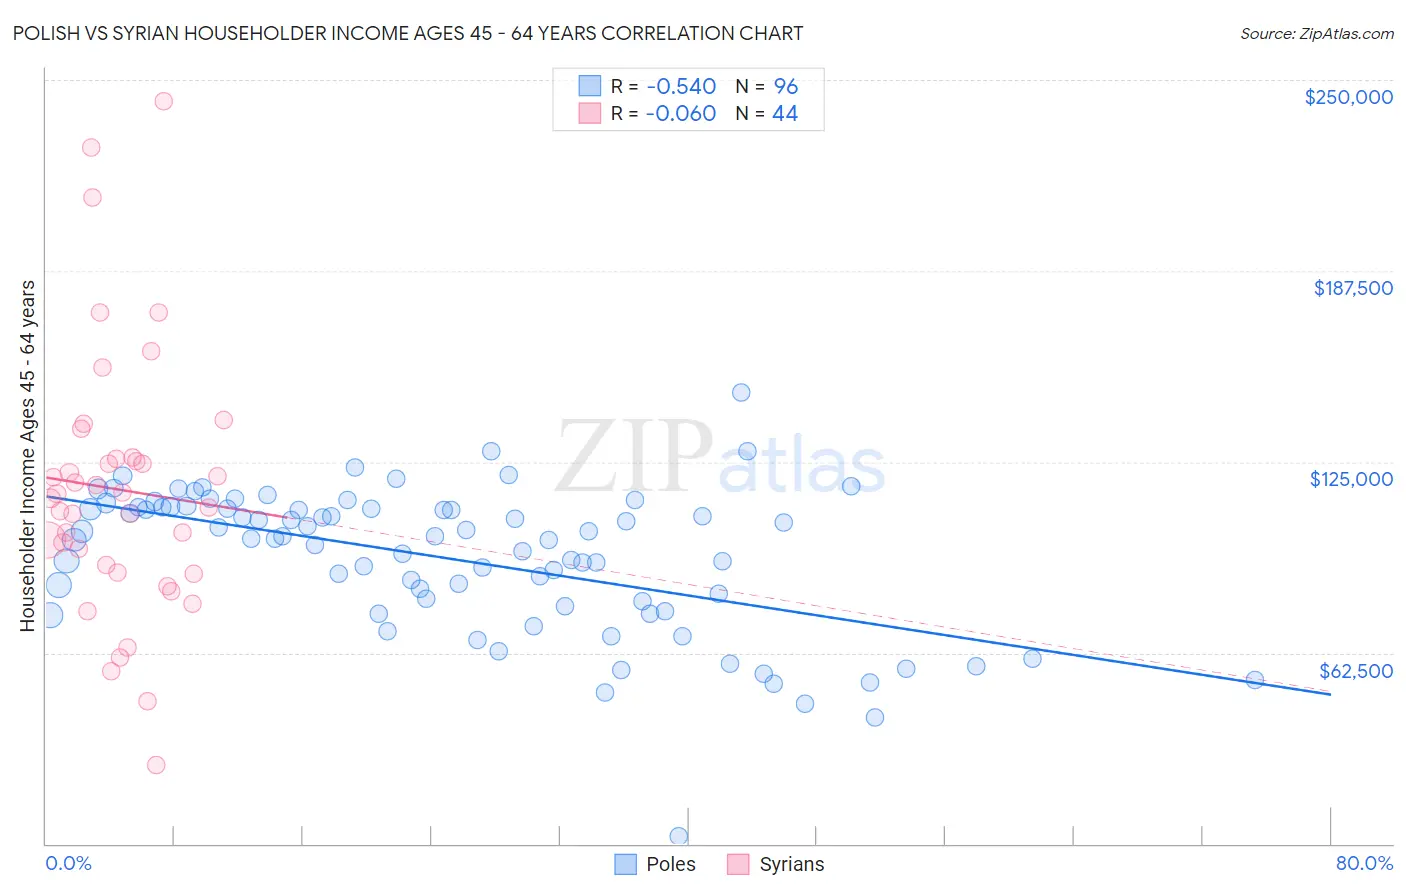 Polish vs Syrian Householder Income Ages 45 - 64 years